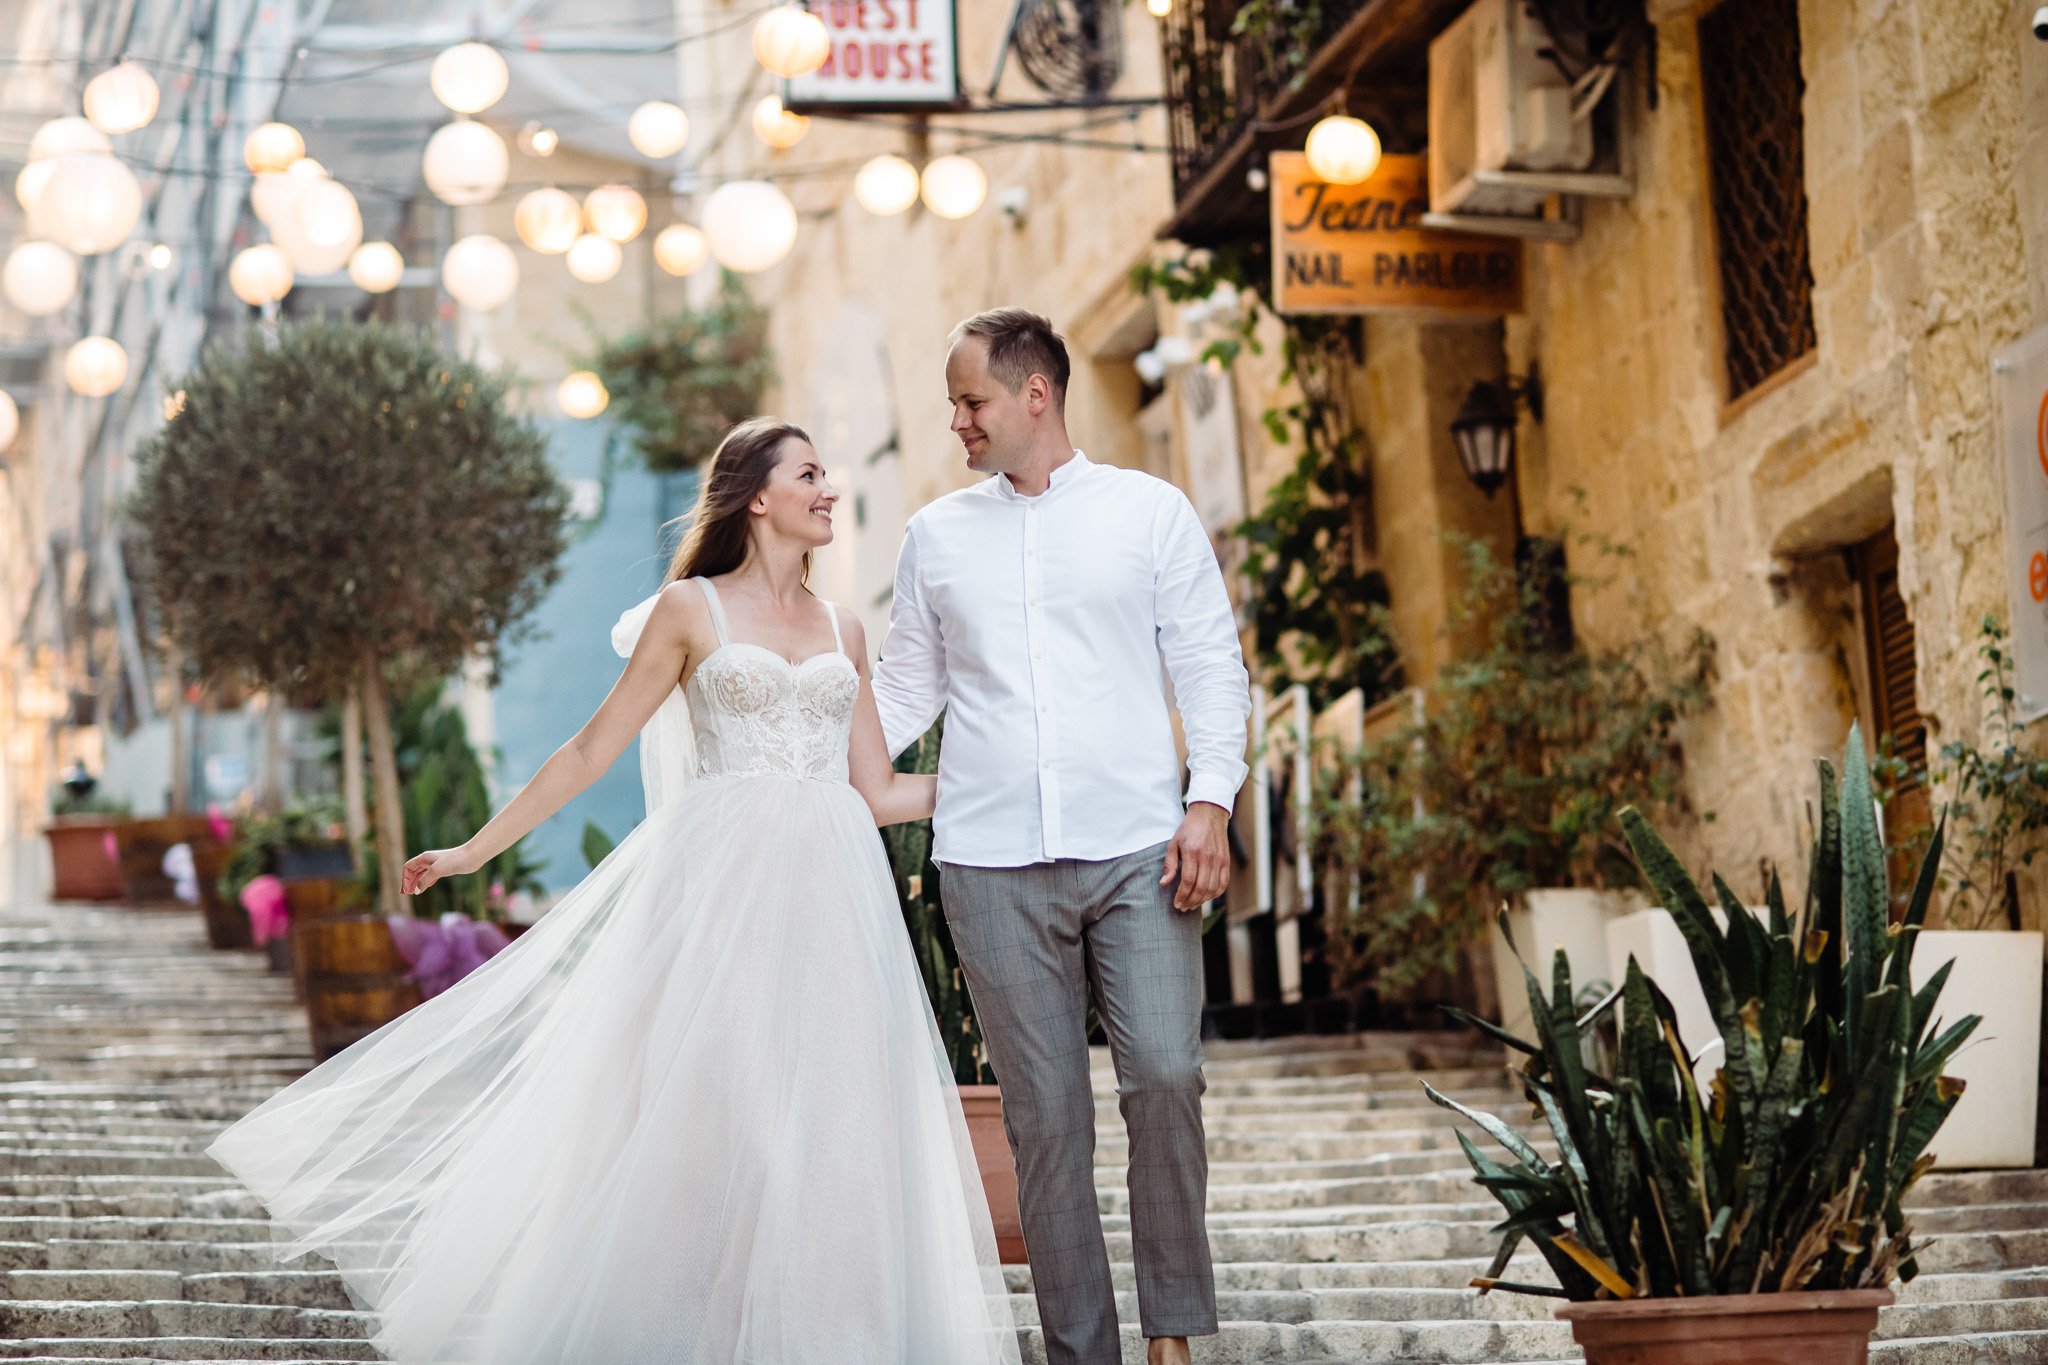 Newly married couple during a wedding photo shoot in Valletta